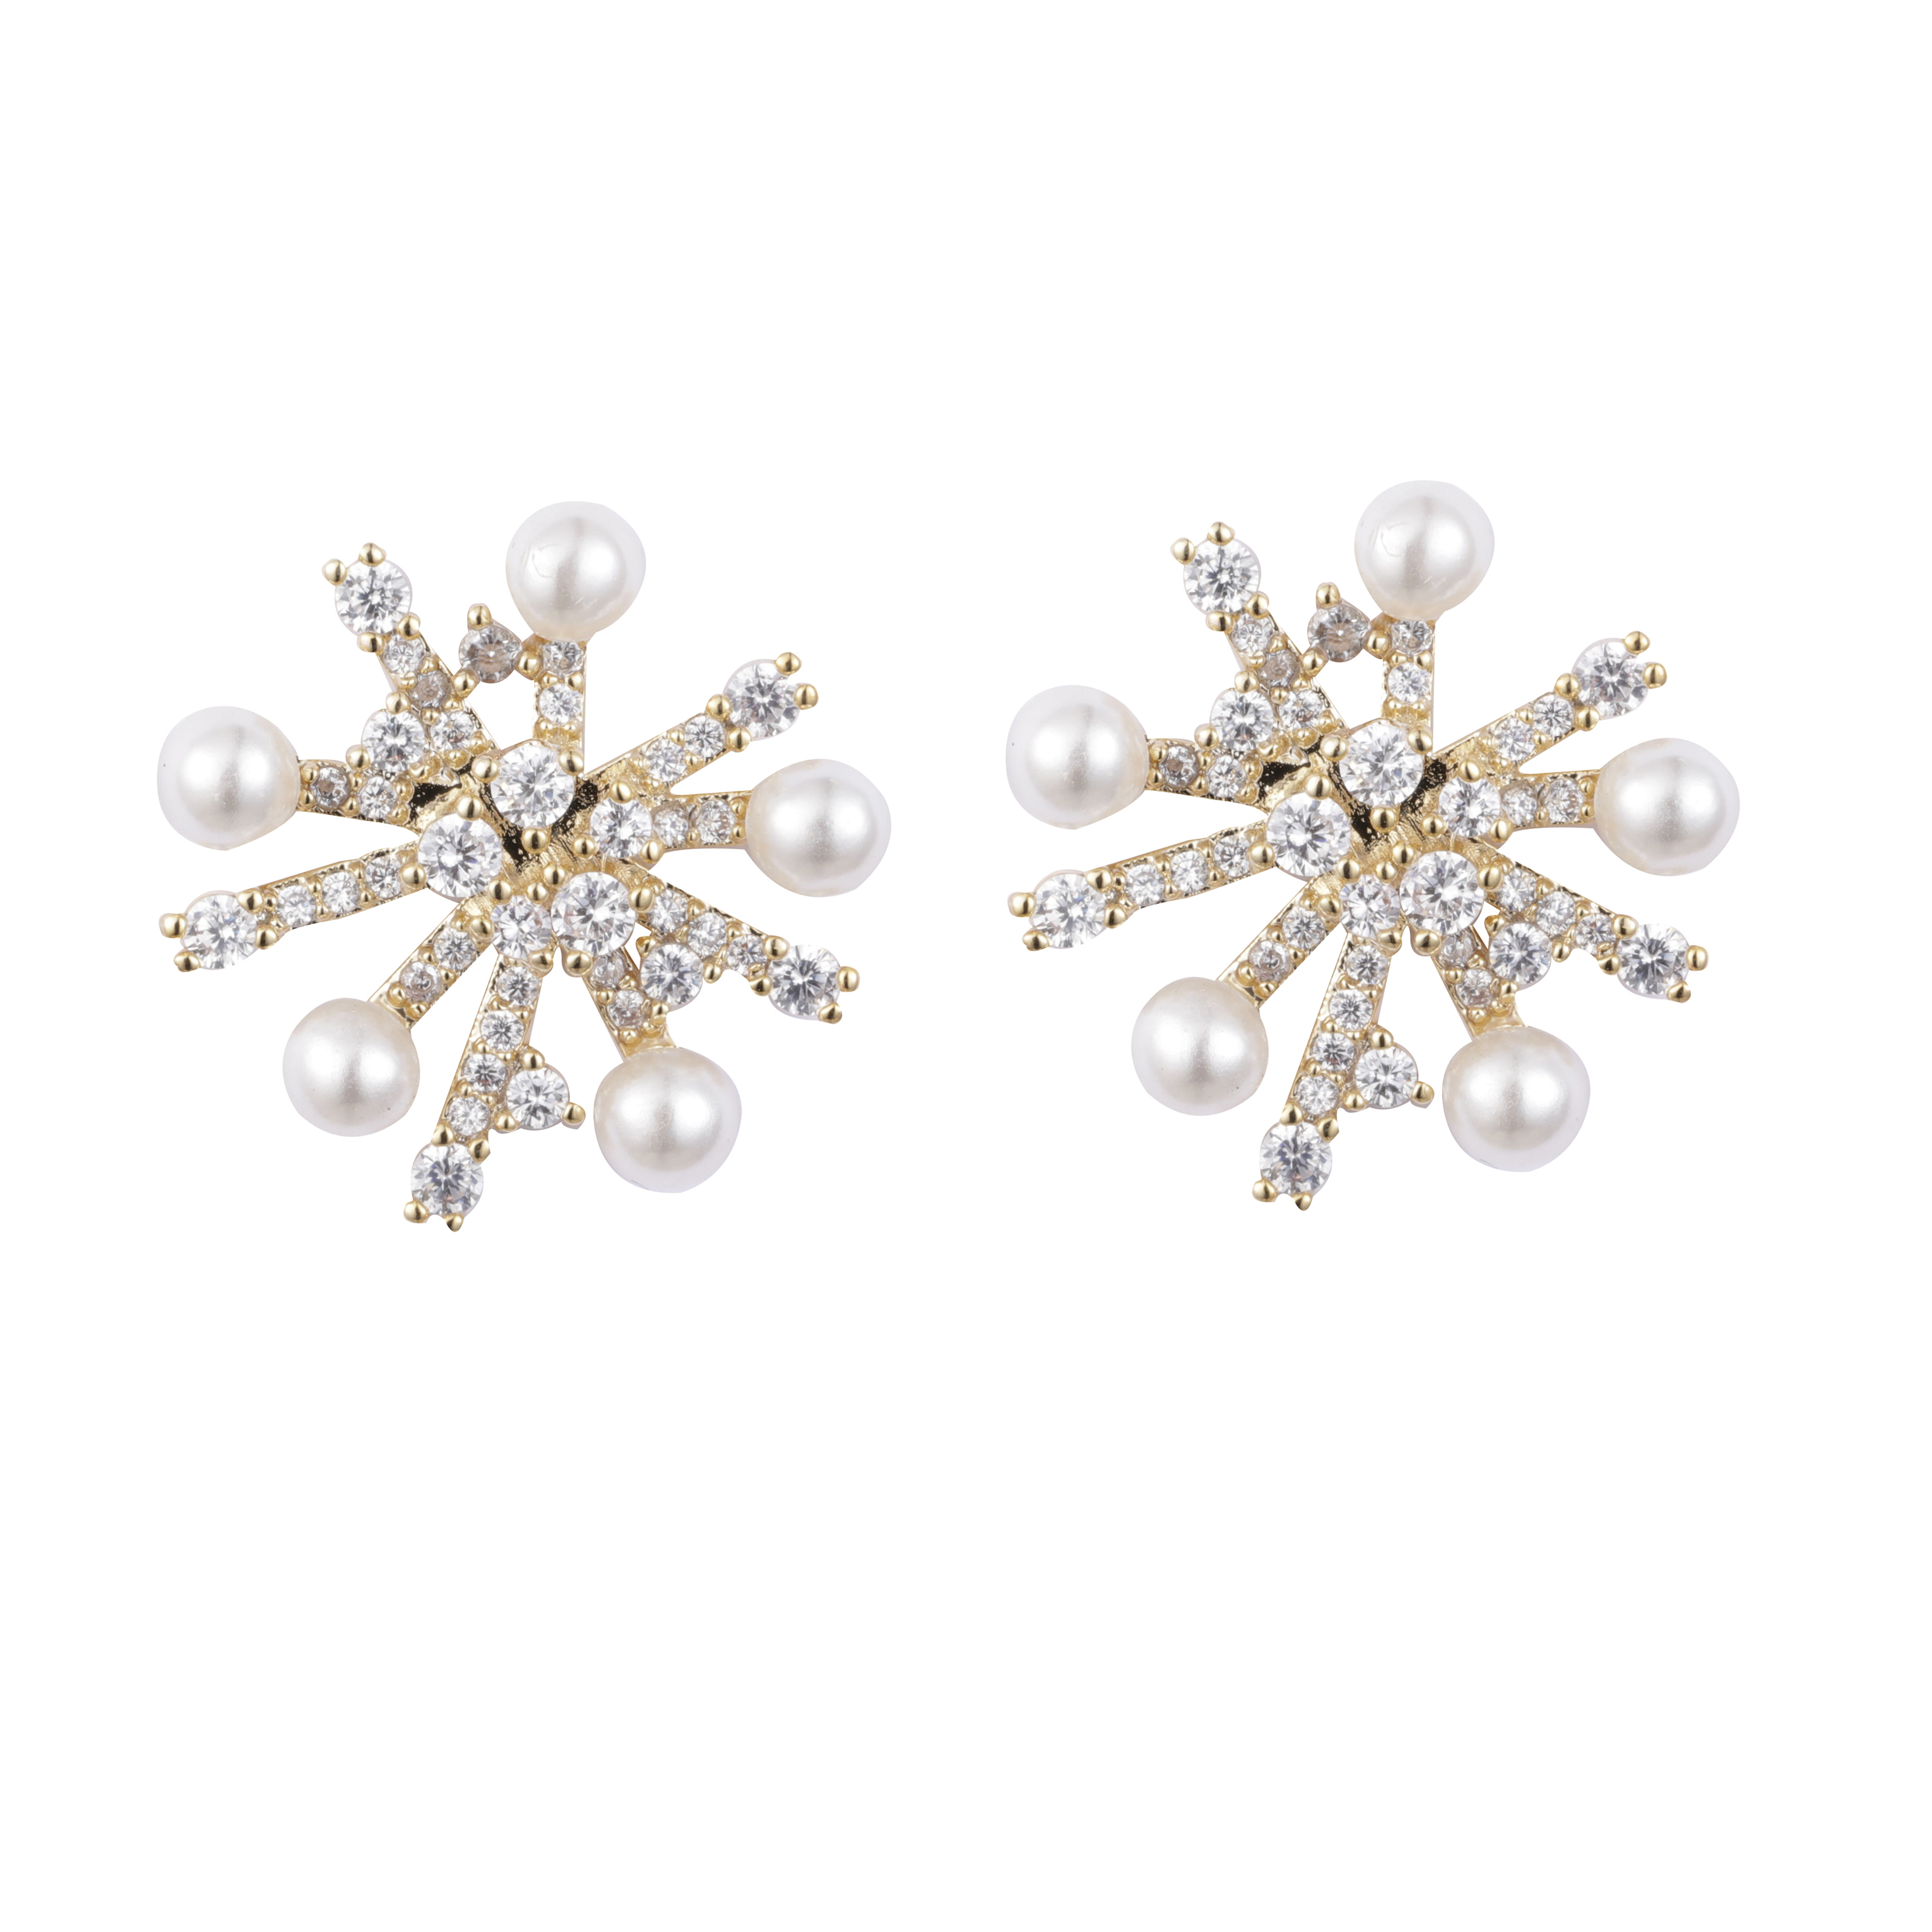 White Pearl Cz Earrings Wholesale Price